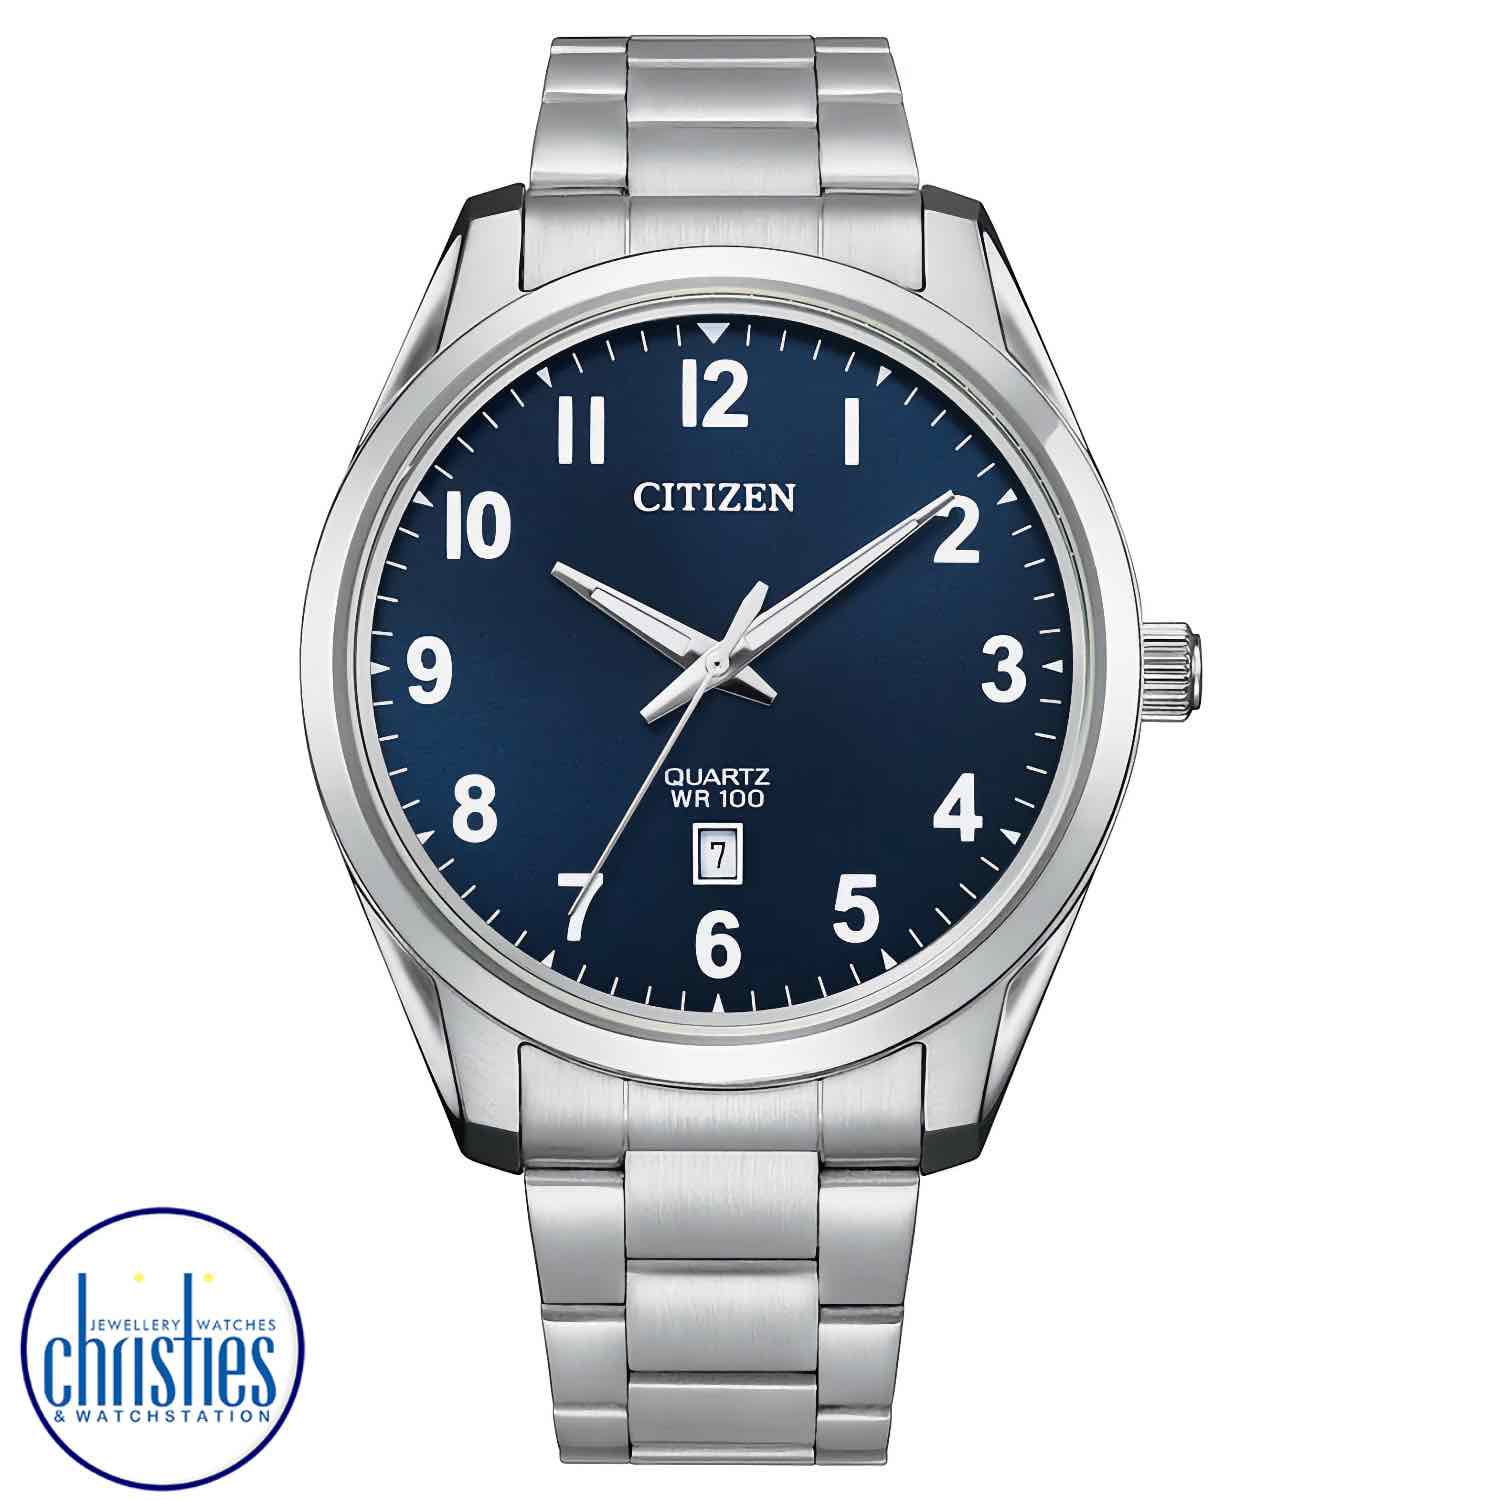 BI1031-51L CITIZEN Quartz Watch. Stylishly designed with sleek silver tones and an eye-catching midnight blue dial, this Quartz powered watch is a blend of ageless aesthetics and sophisticated construction.